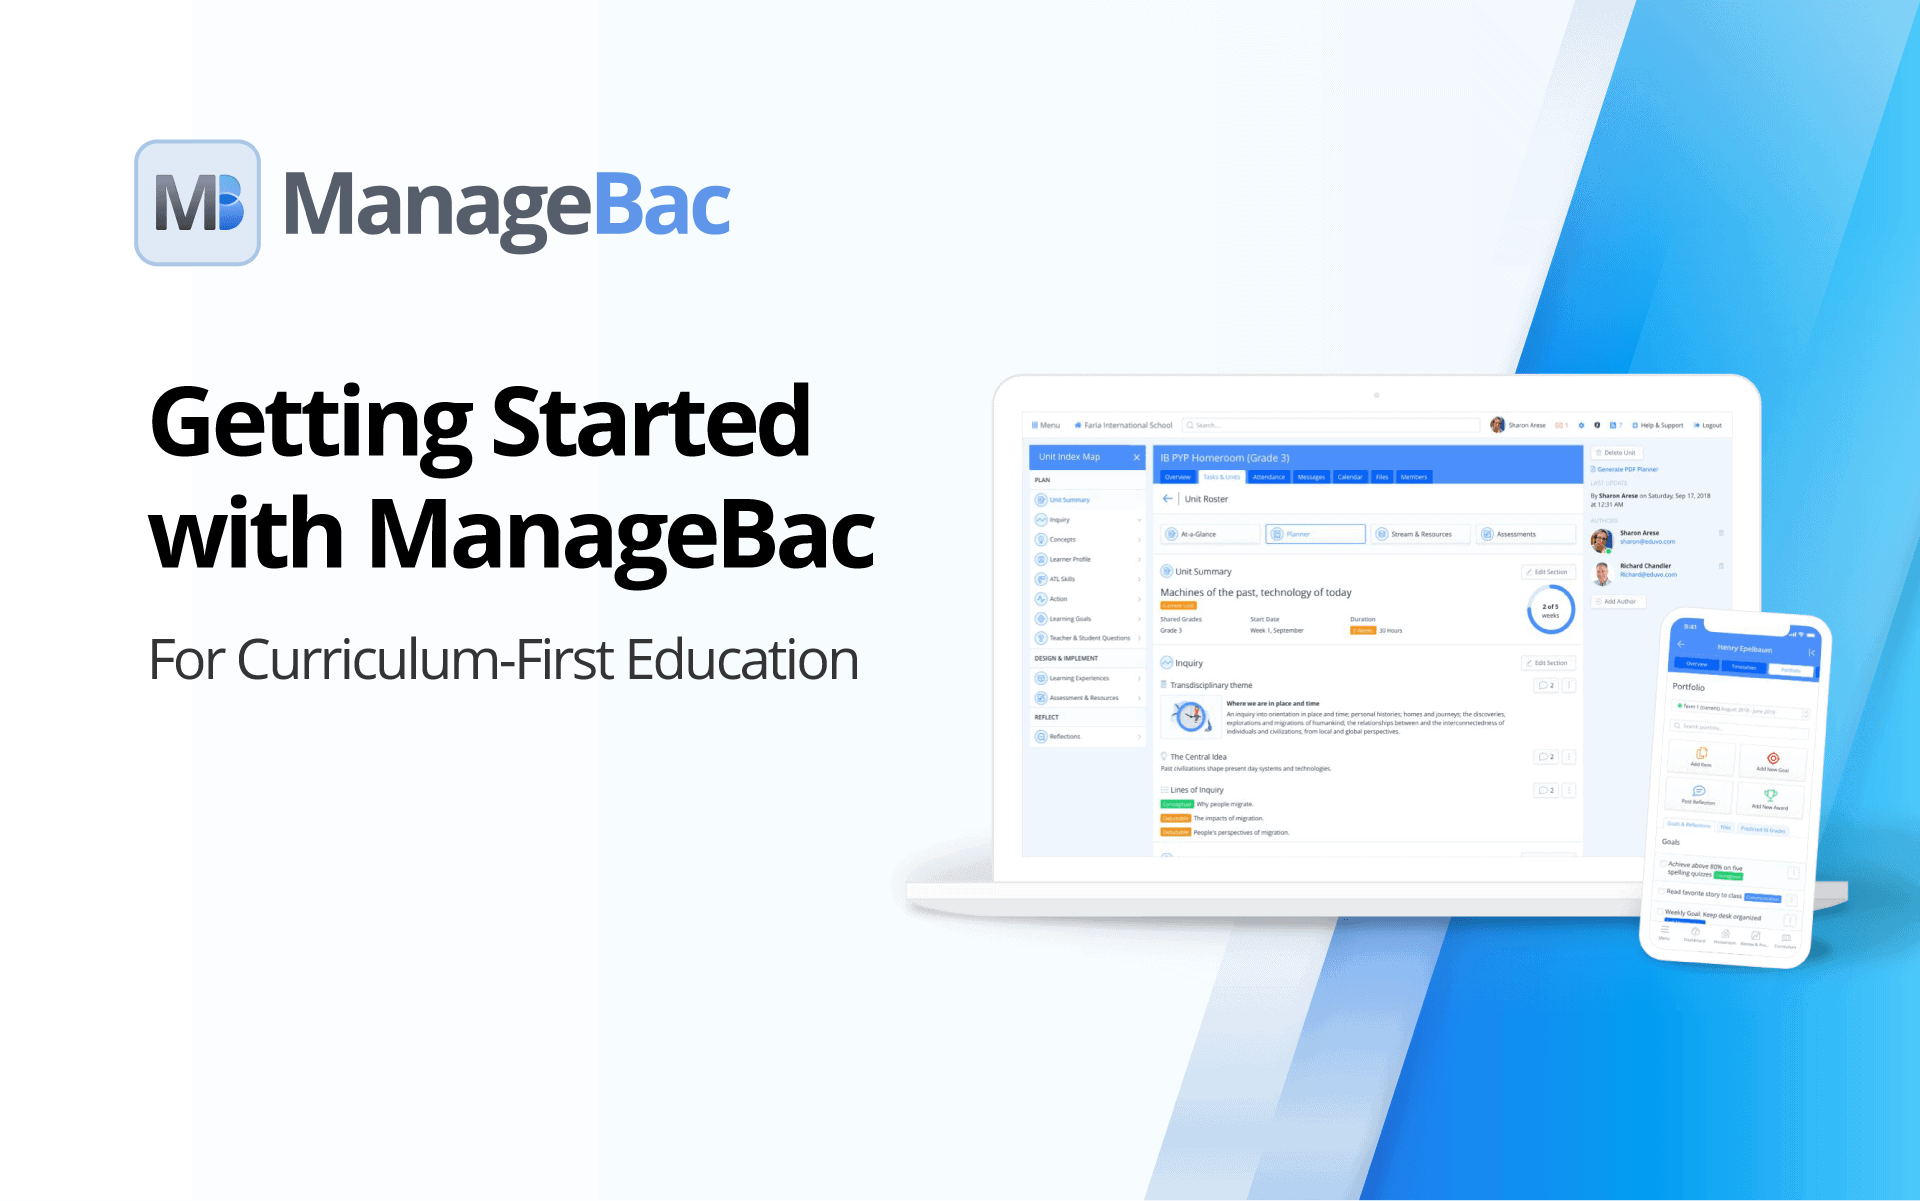 Getting Started with ManageBac for Curriculum-First Education